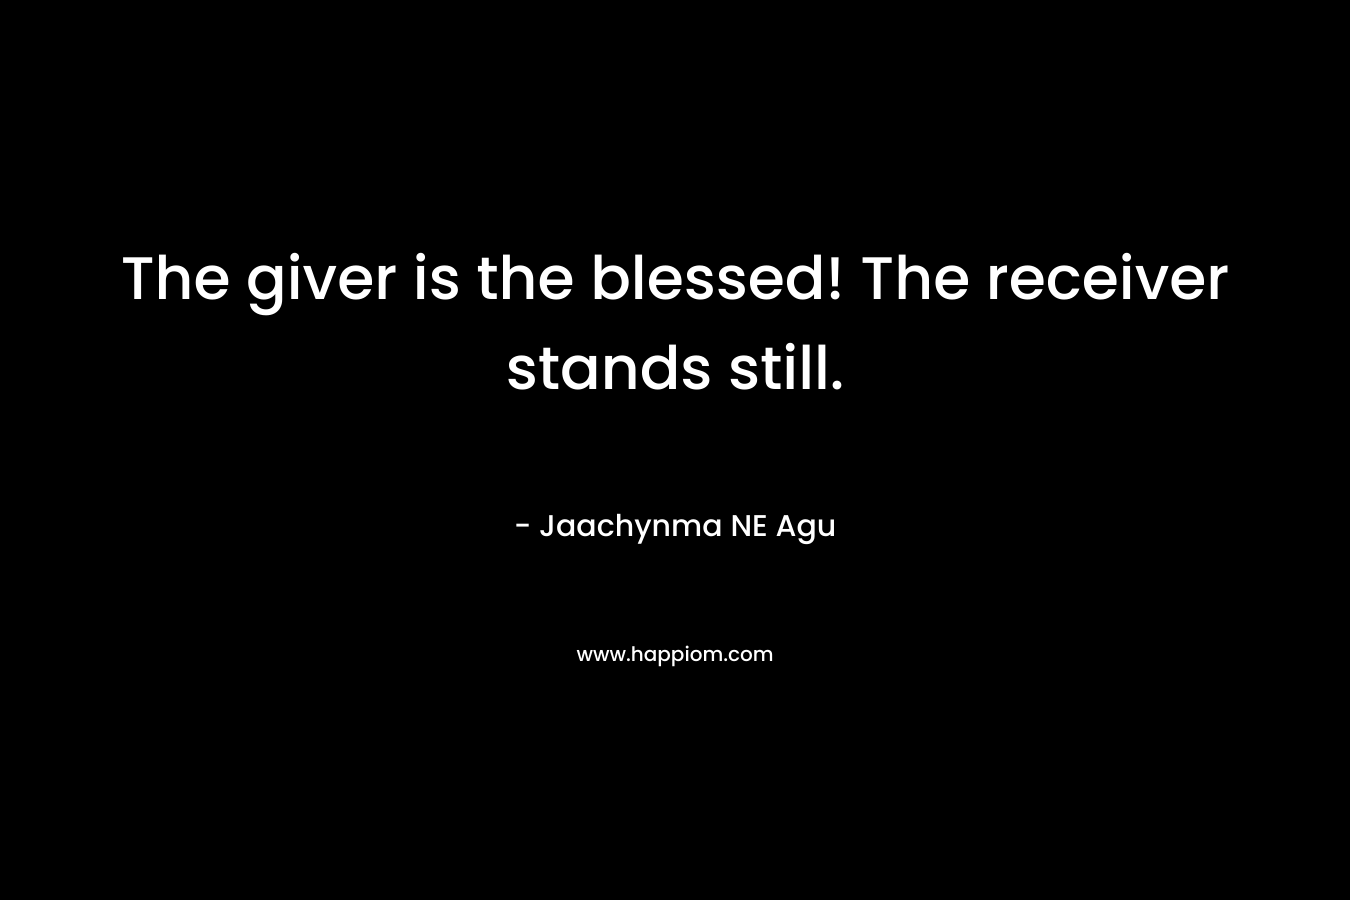 The giver is the blessed! The receiver stands still. – Jaachynma NE Agu